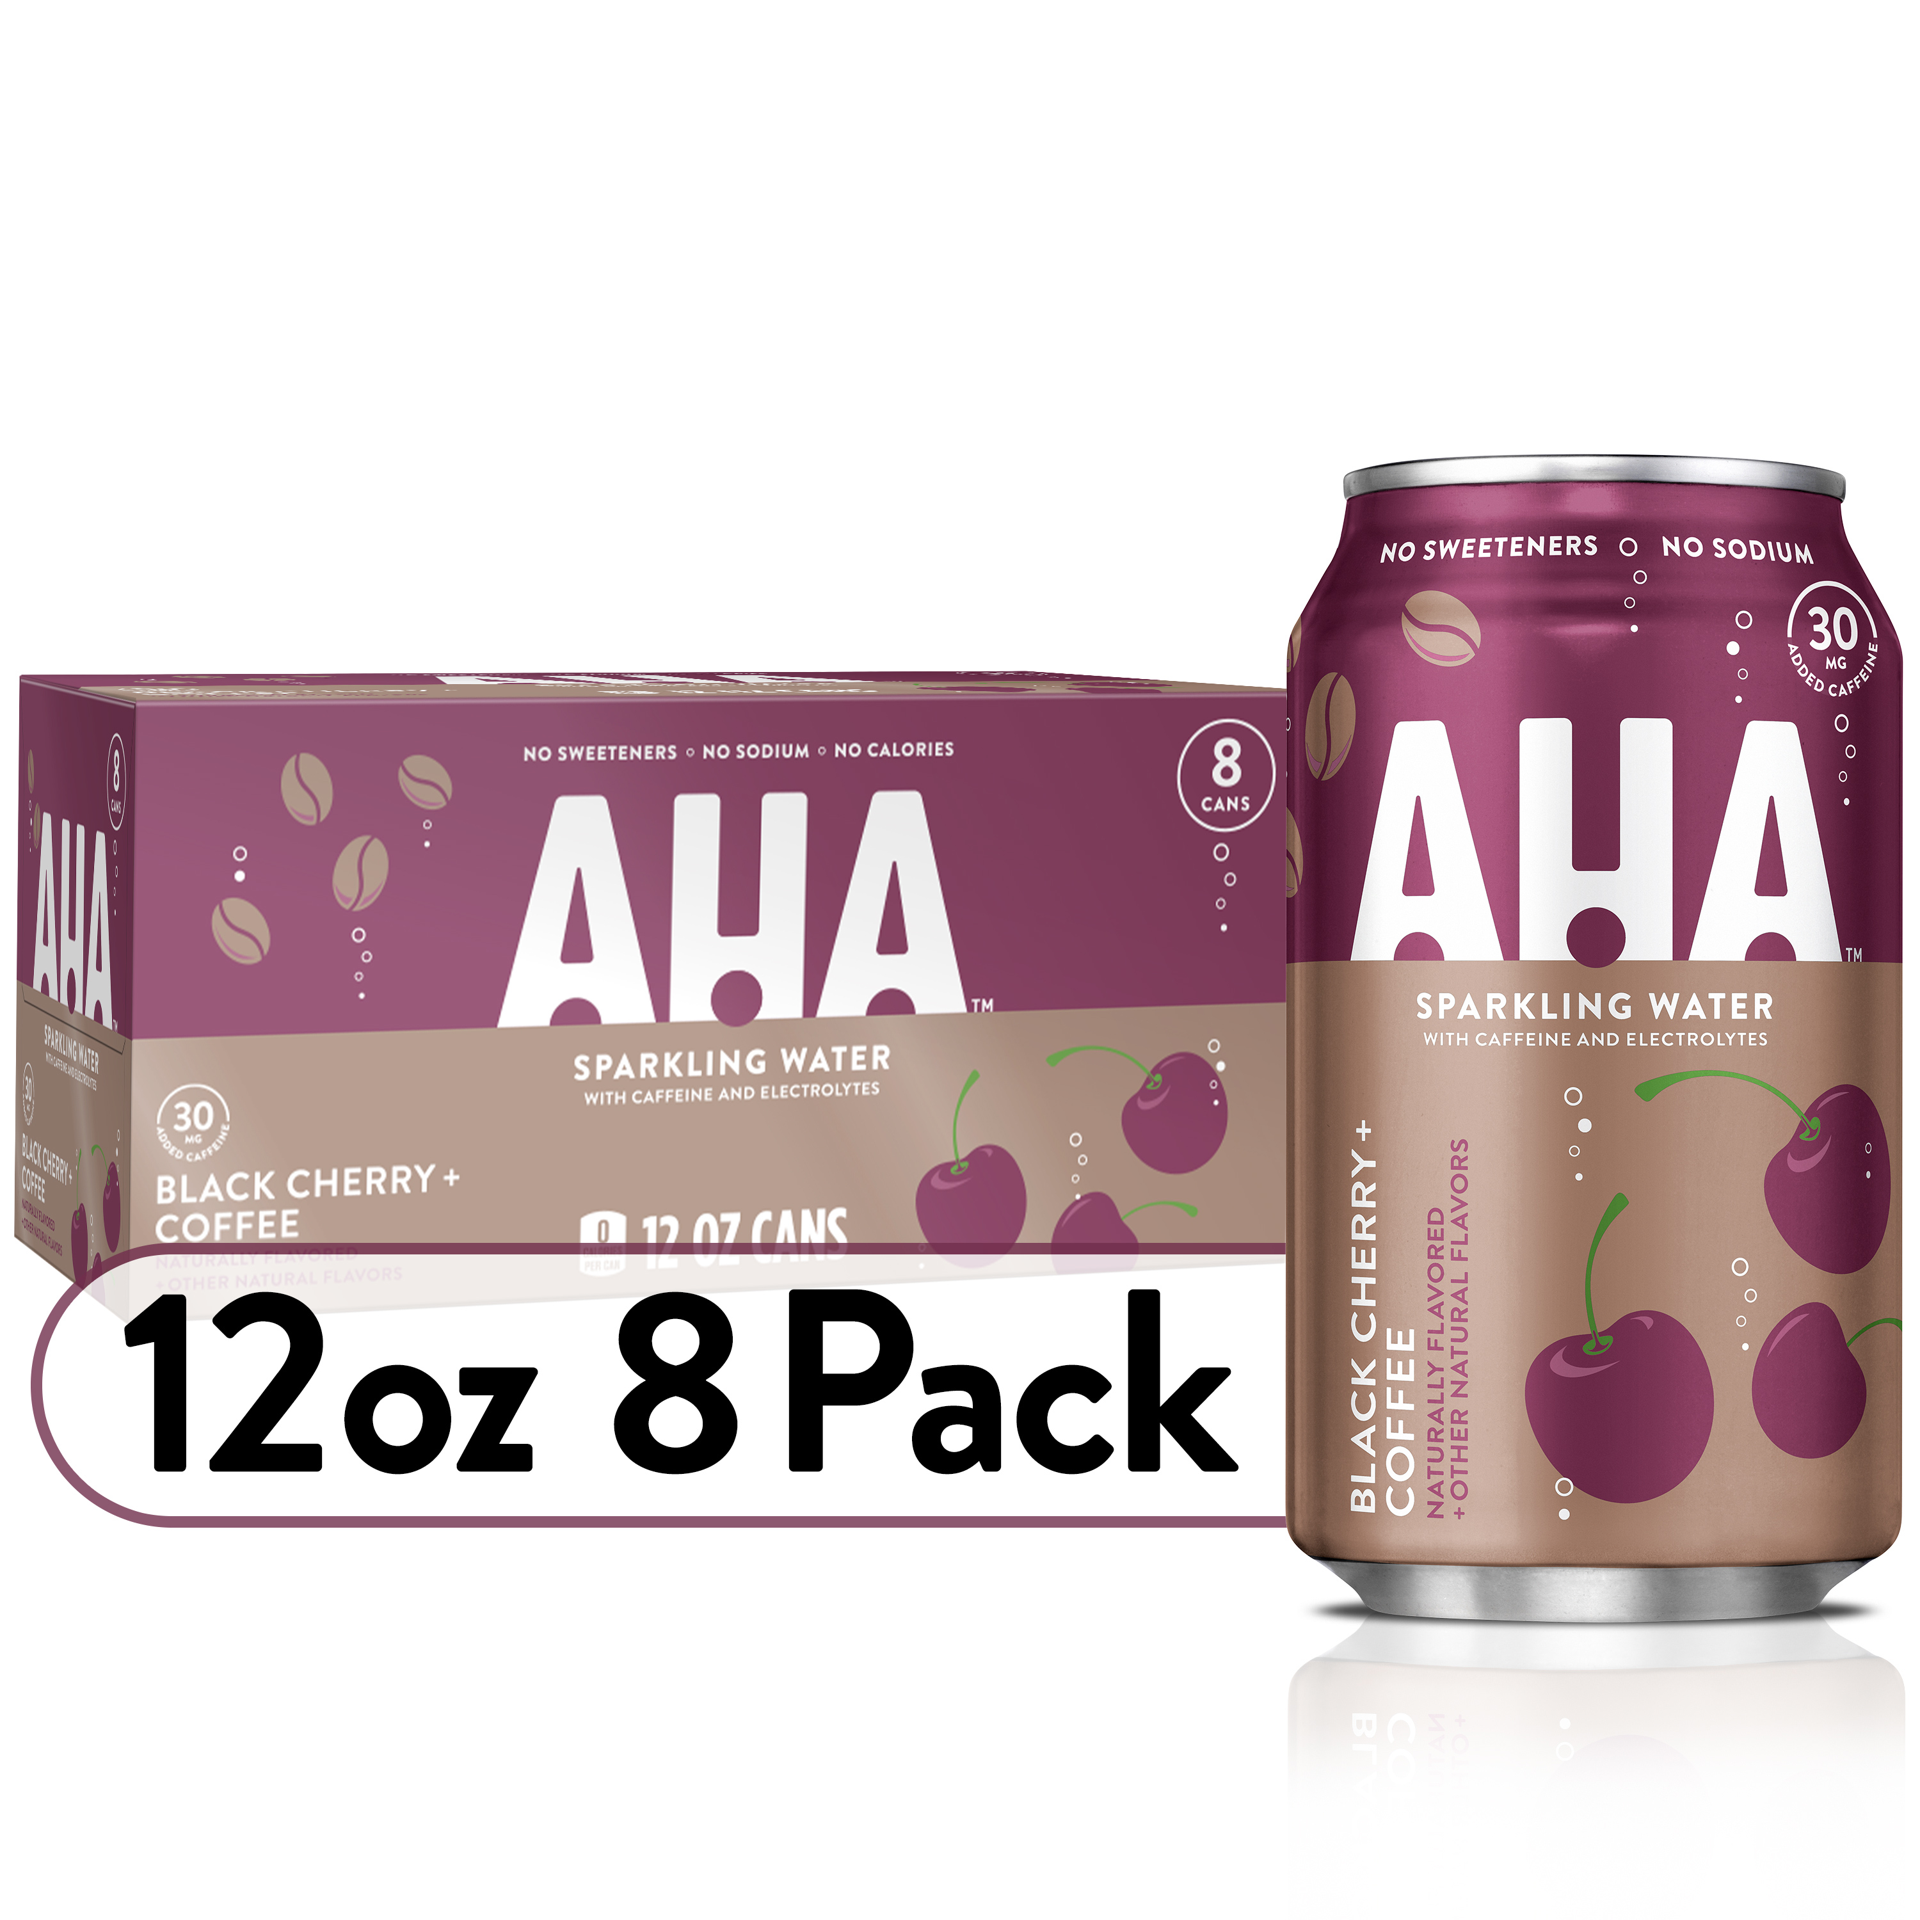 slide 1 of 10, AHA Sparkling Water, Black Cherry + Coffee Flavored Water, with Caffeine & Electrolytes, Zero Calories, Sodium Free, No Sweeteners, 12 fl oz, 8 Pack, 8 ct; 12 fl oz